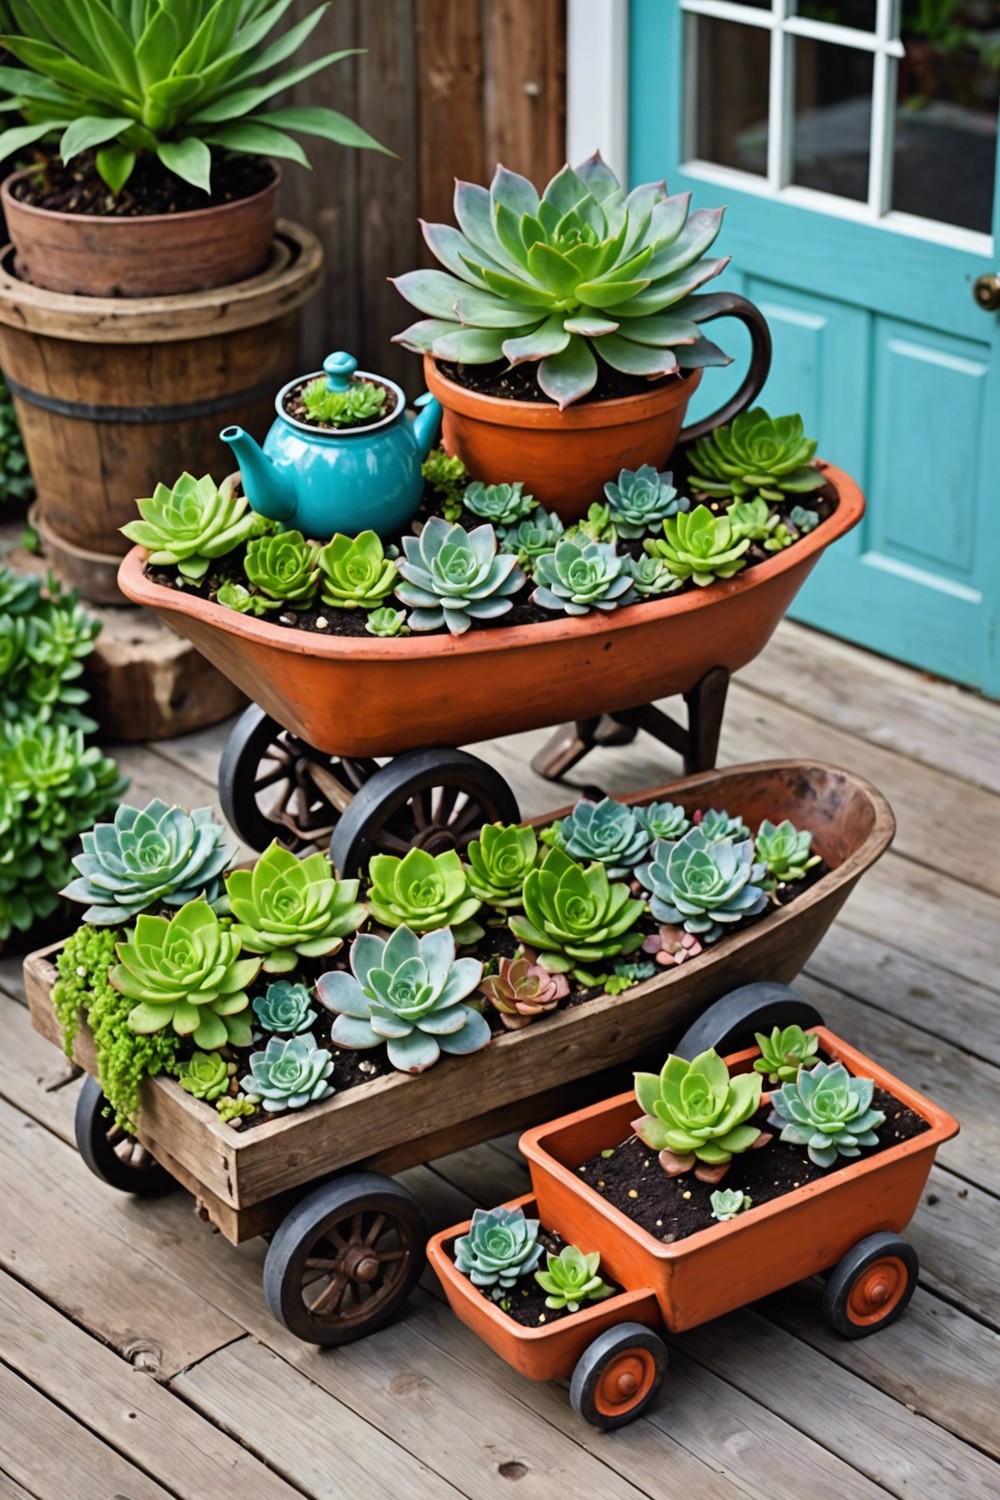 Whimsical Succulent Planters for a Playful Touch